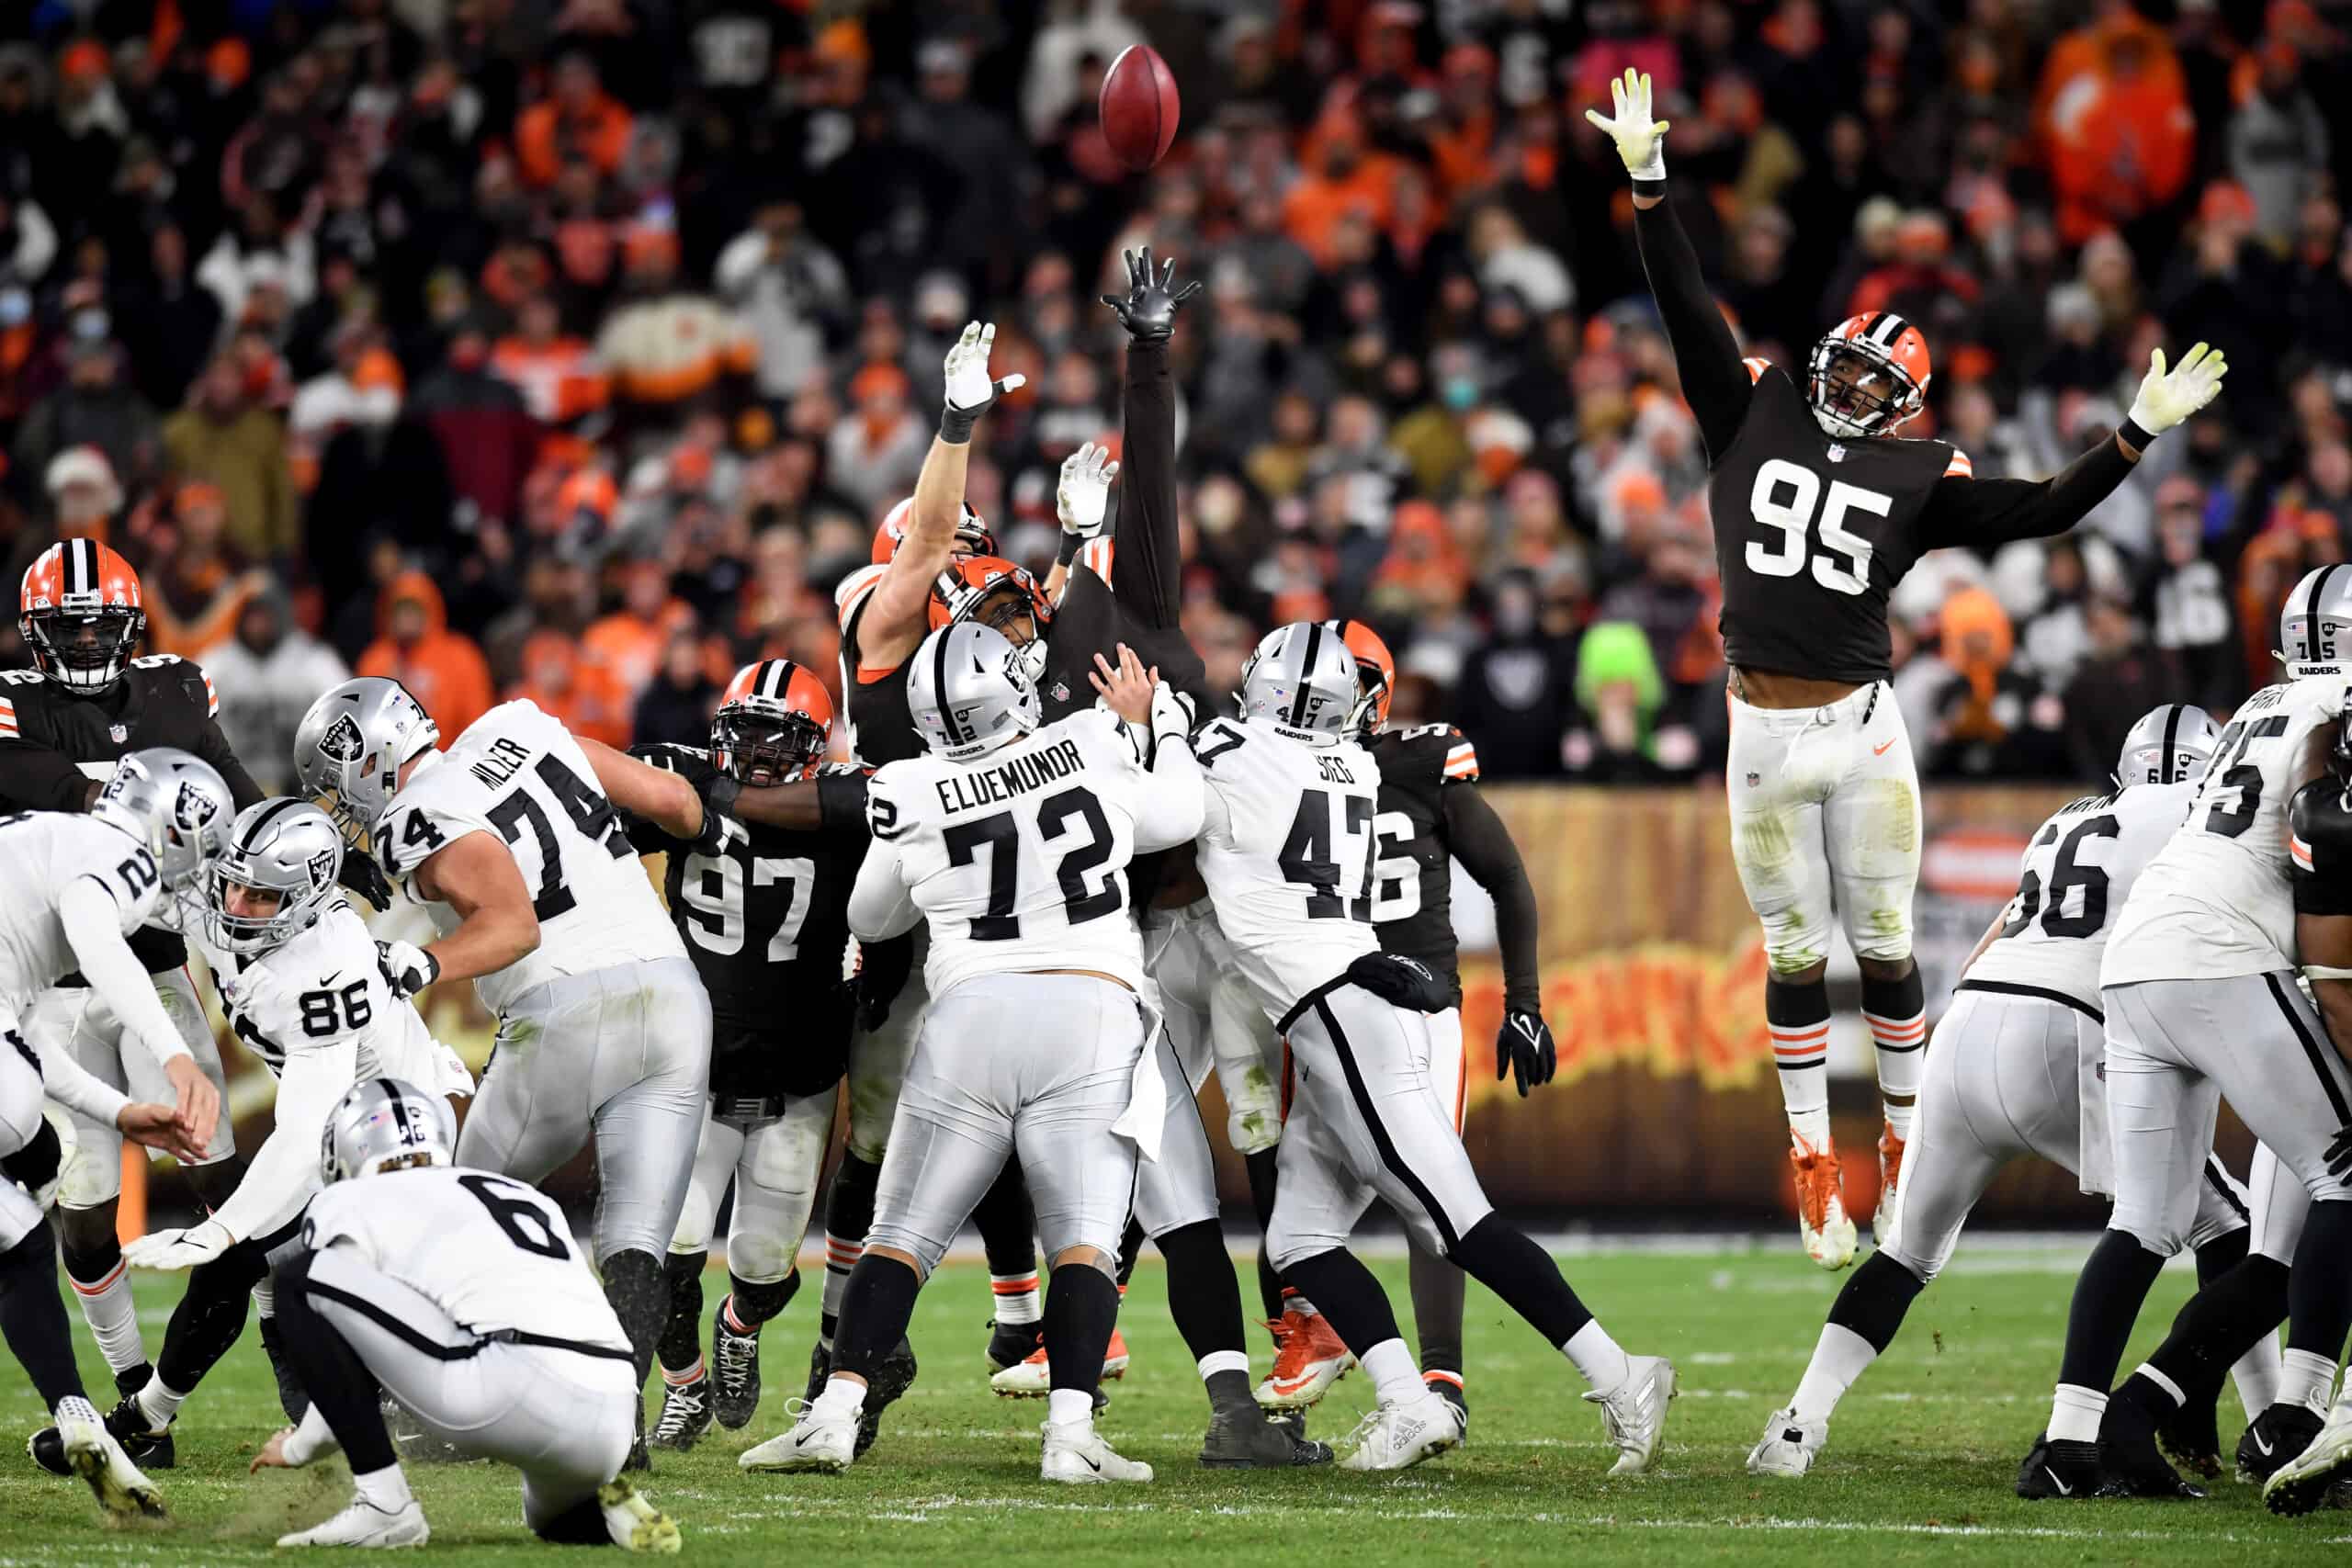 The Cleveland Browns attempt to defend as a field goal is kicked in the fourth quarter of the game against the Las Vegas Raiders at FirstEnergy Stadium on December 20, 2021 in Cleveland, Ohio. 